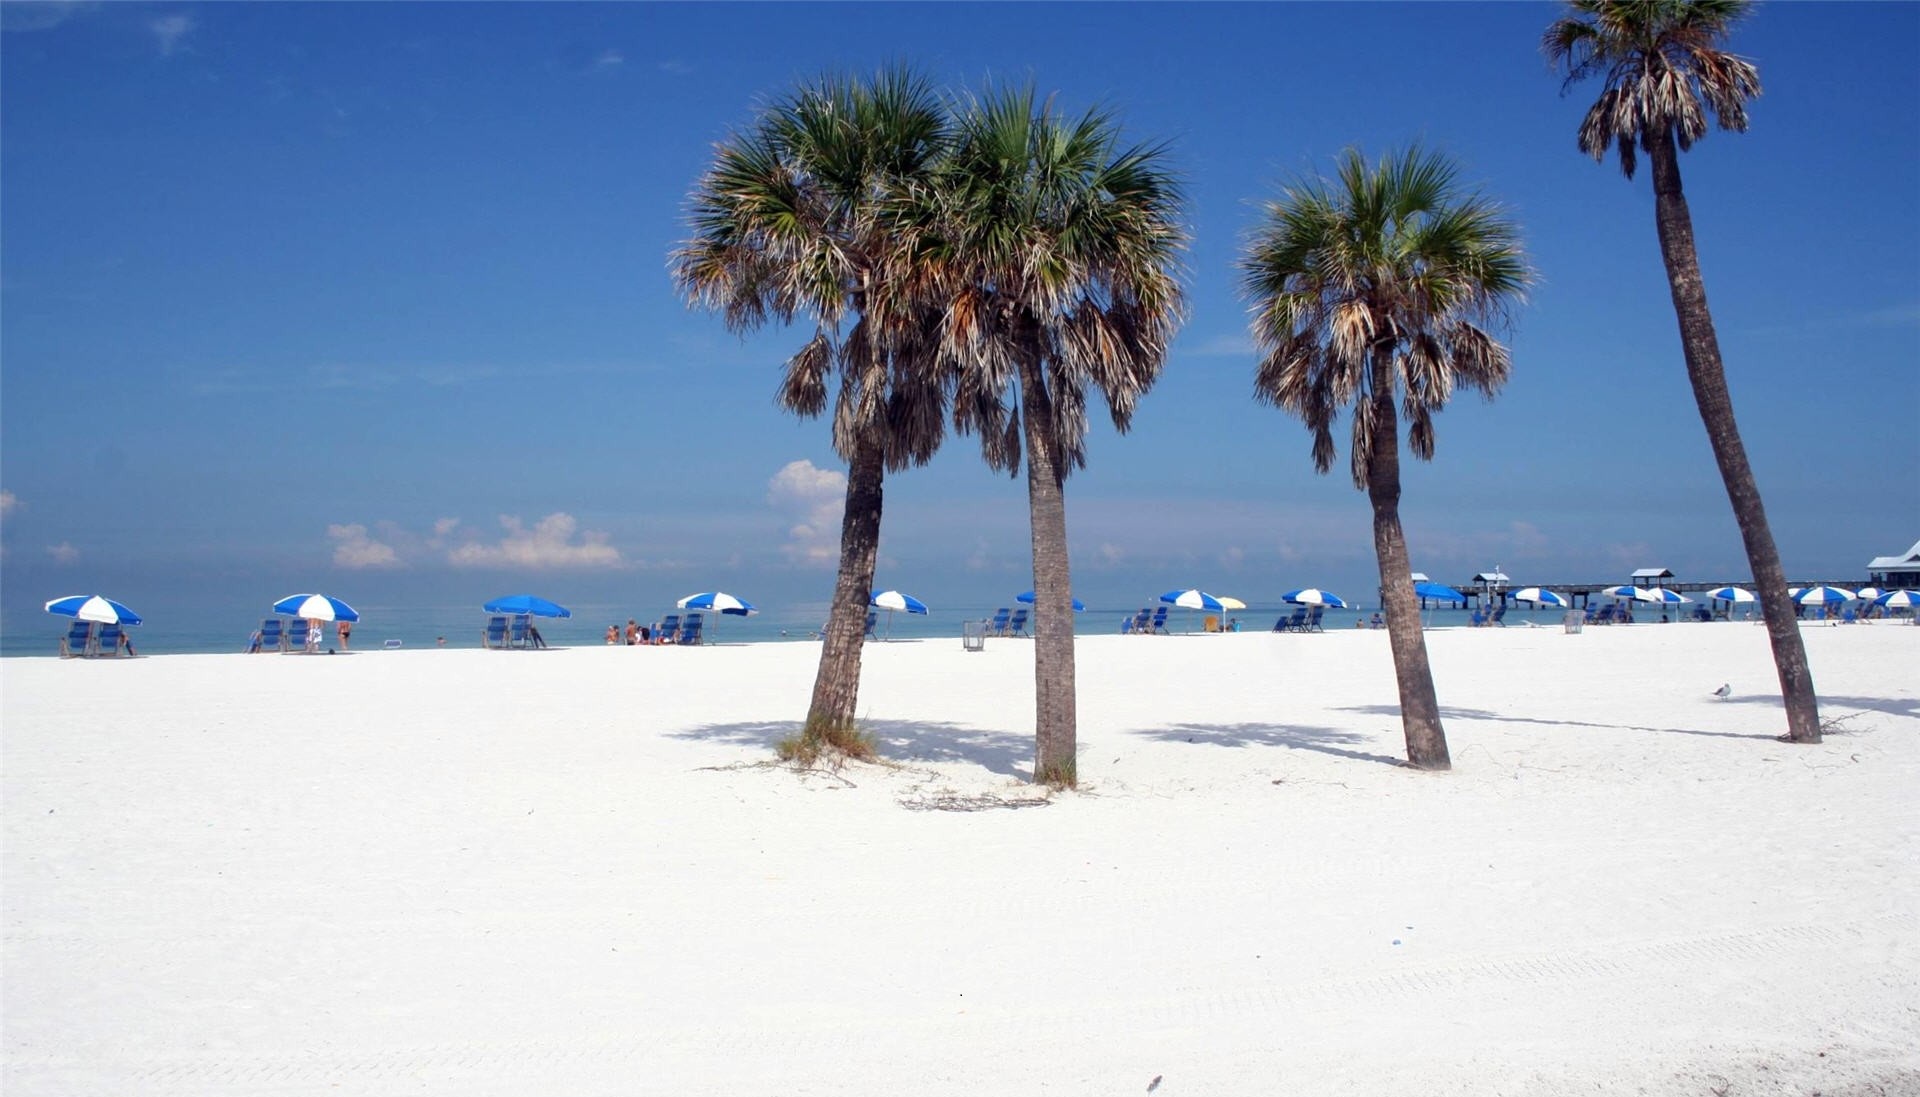  on August 31 2015 By admin Comments Off on Florida Beach Wallpapers